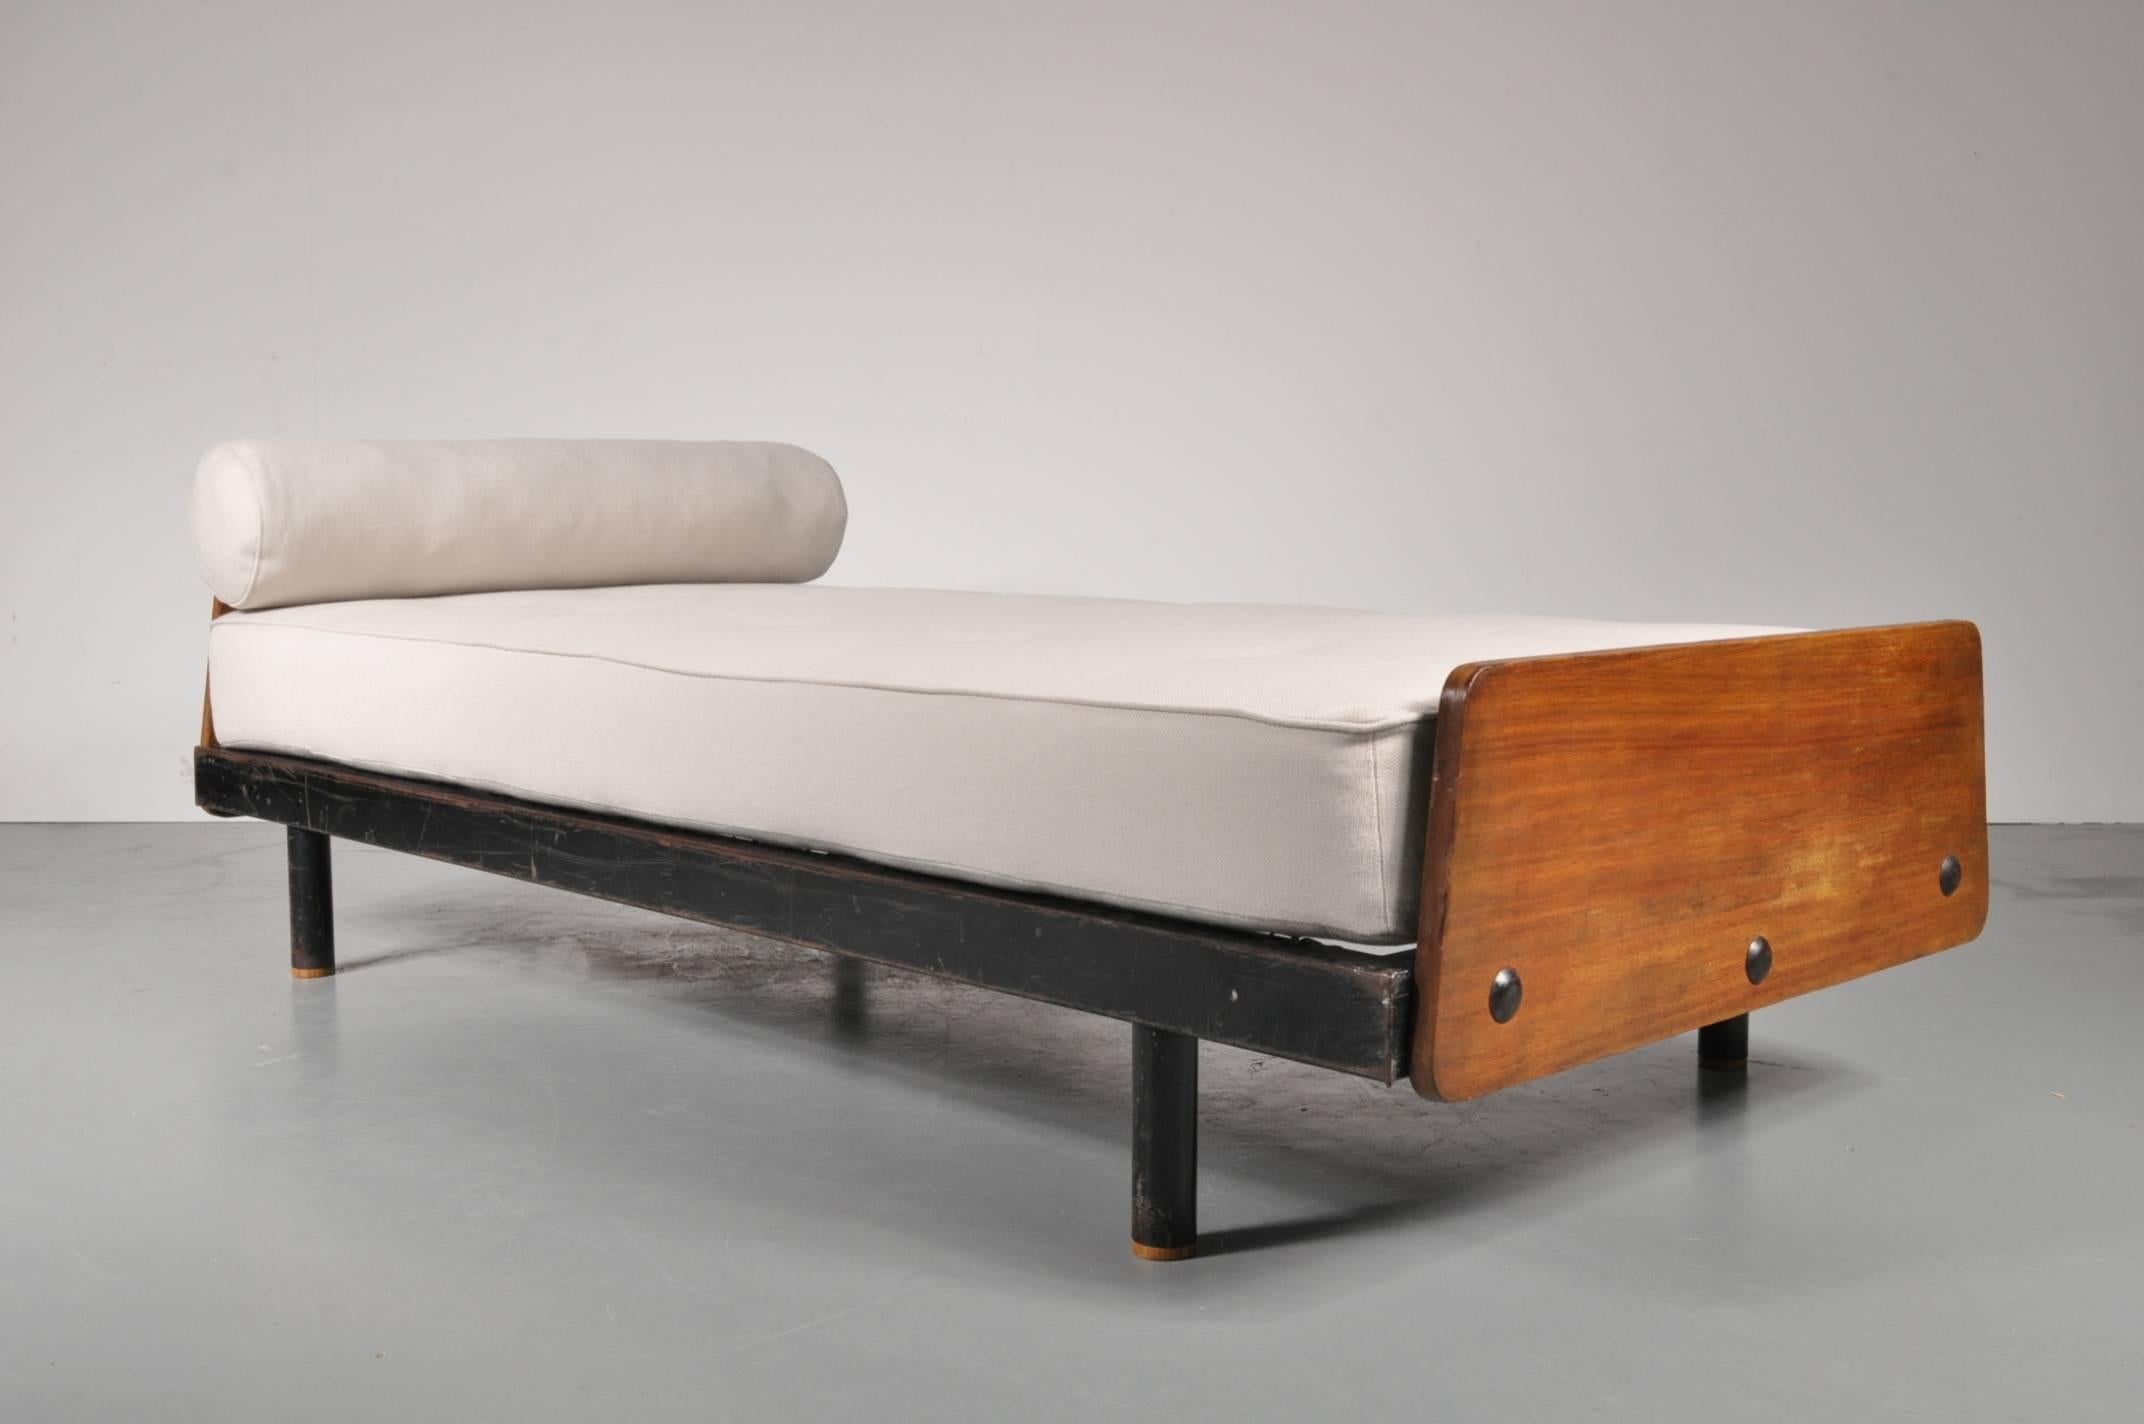 Outstanding SCAL daybed designed by Jean Prouvé, manufactured by Ateliers Prouve (France) circa 1950.

This very rare piece is made from the highest quality black lacquered metal with wonderful wooden ends. The simplistic design and use of